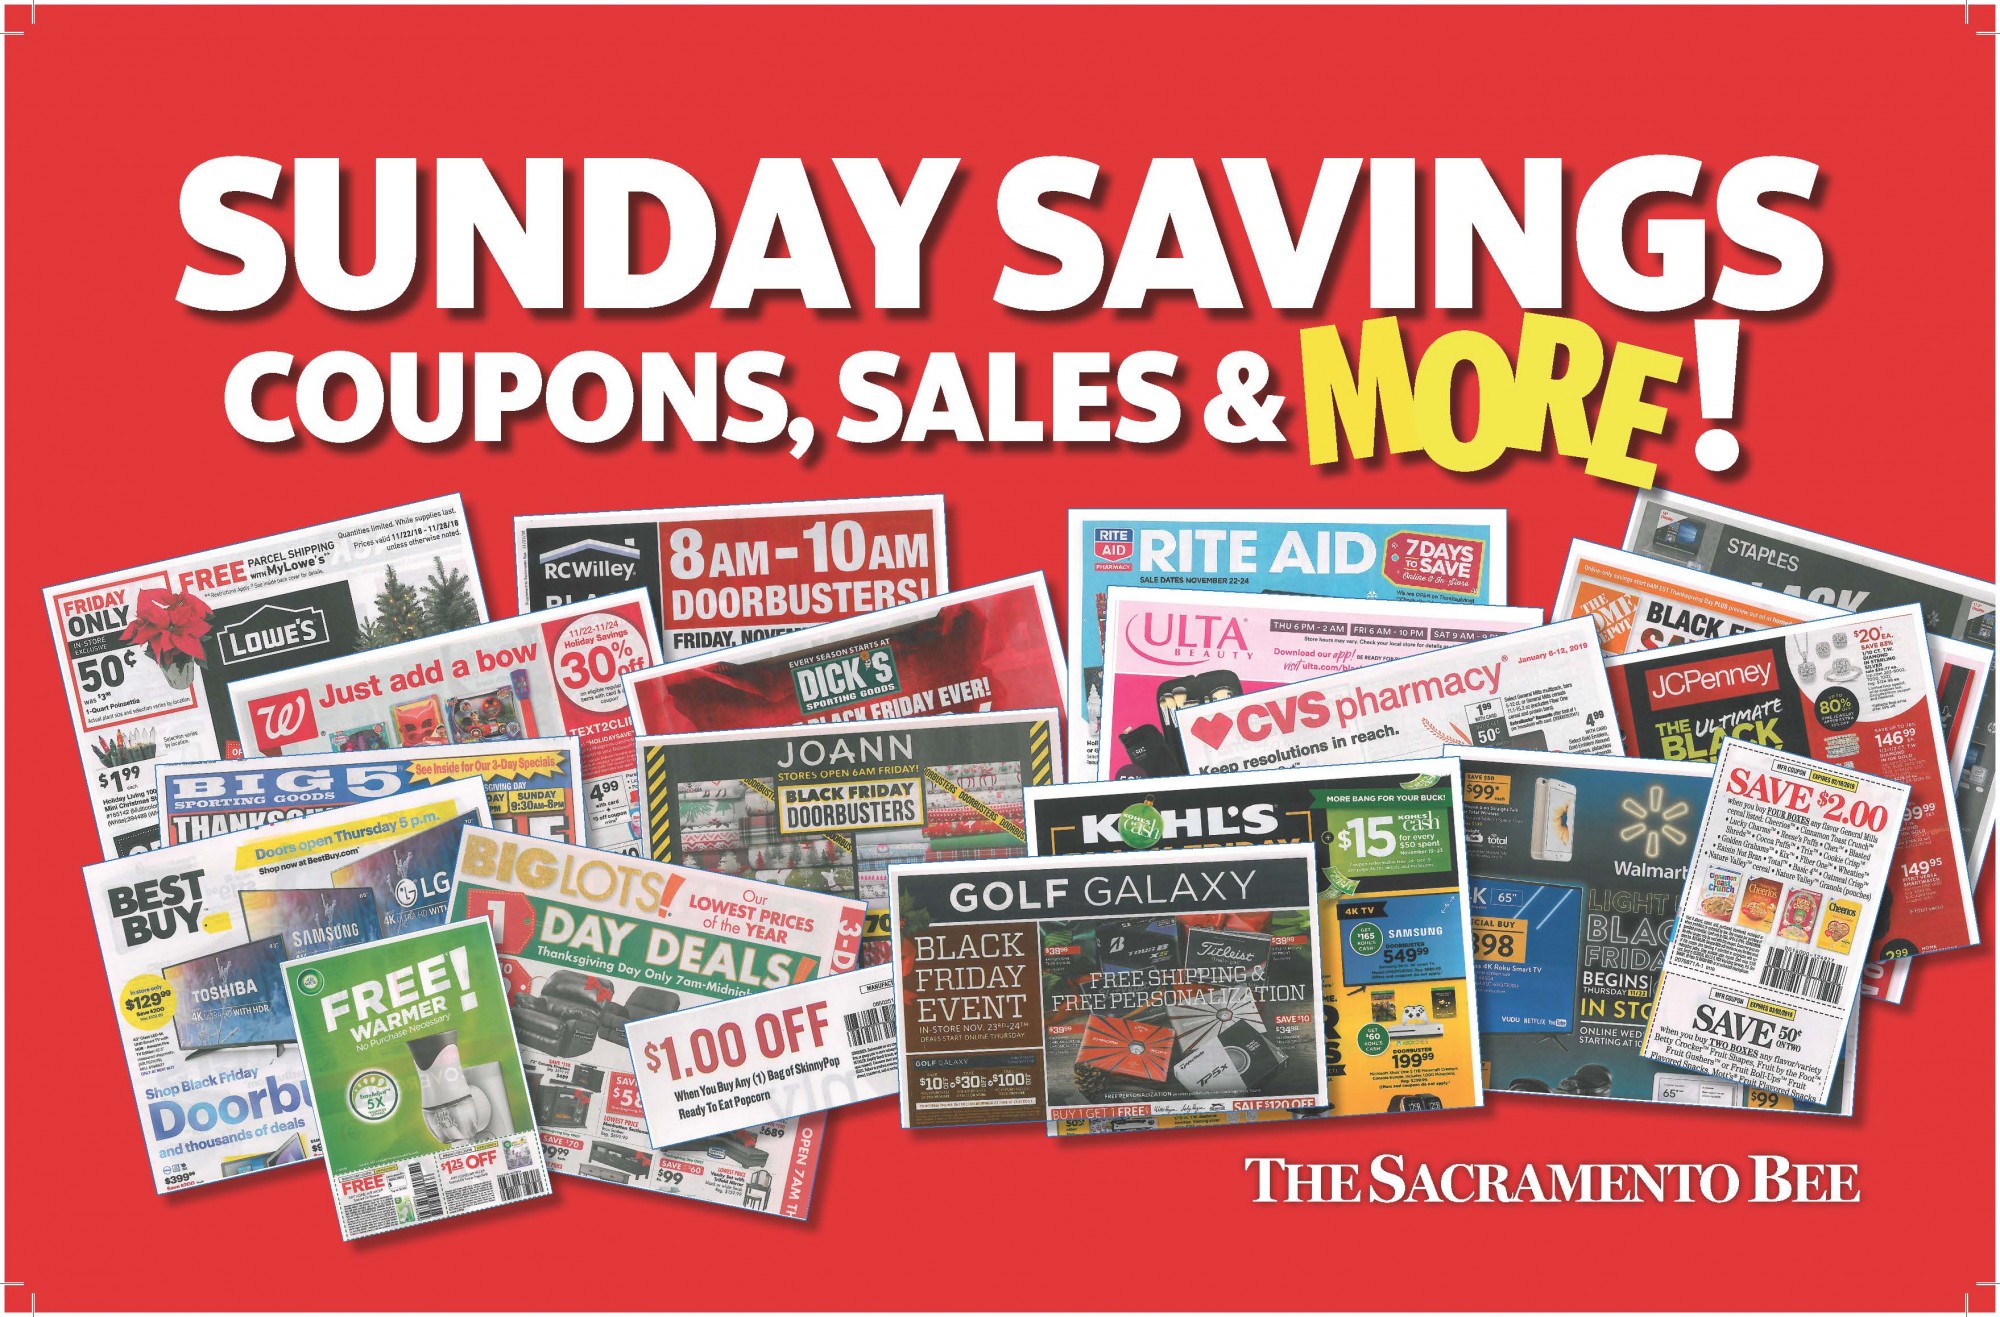 Idea #32 of 50 Days of Ideas! SUNDAY SAVINGS...and MORE!